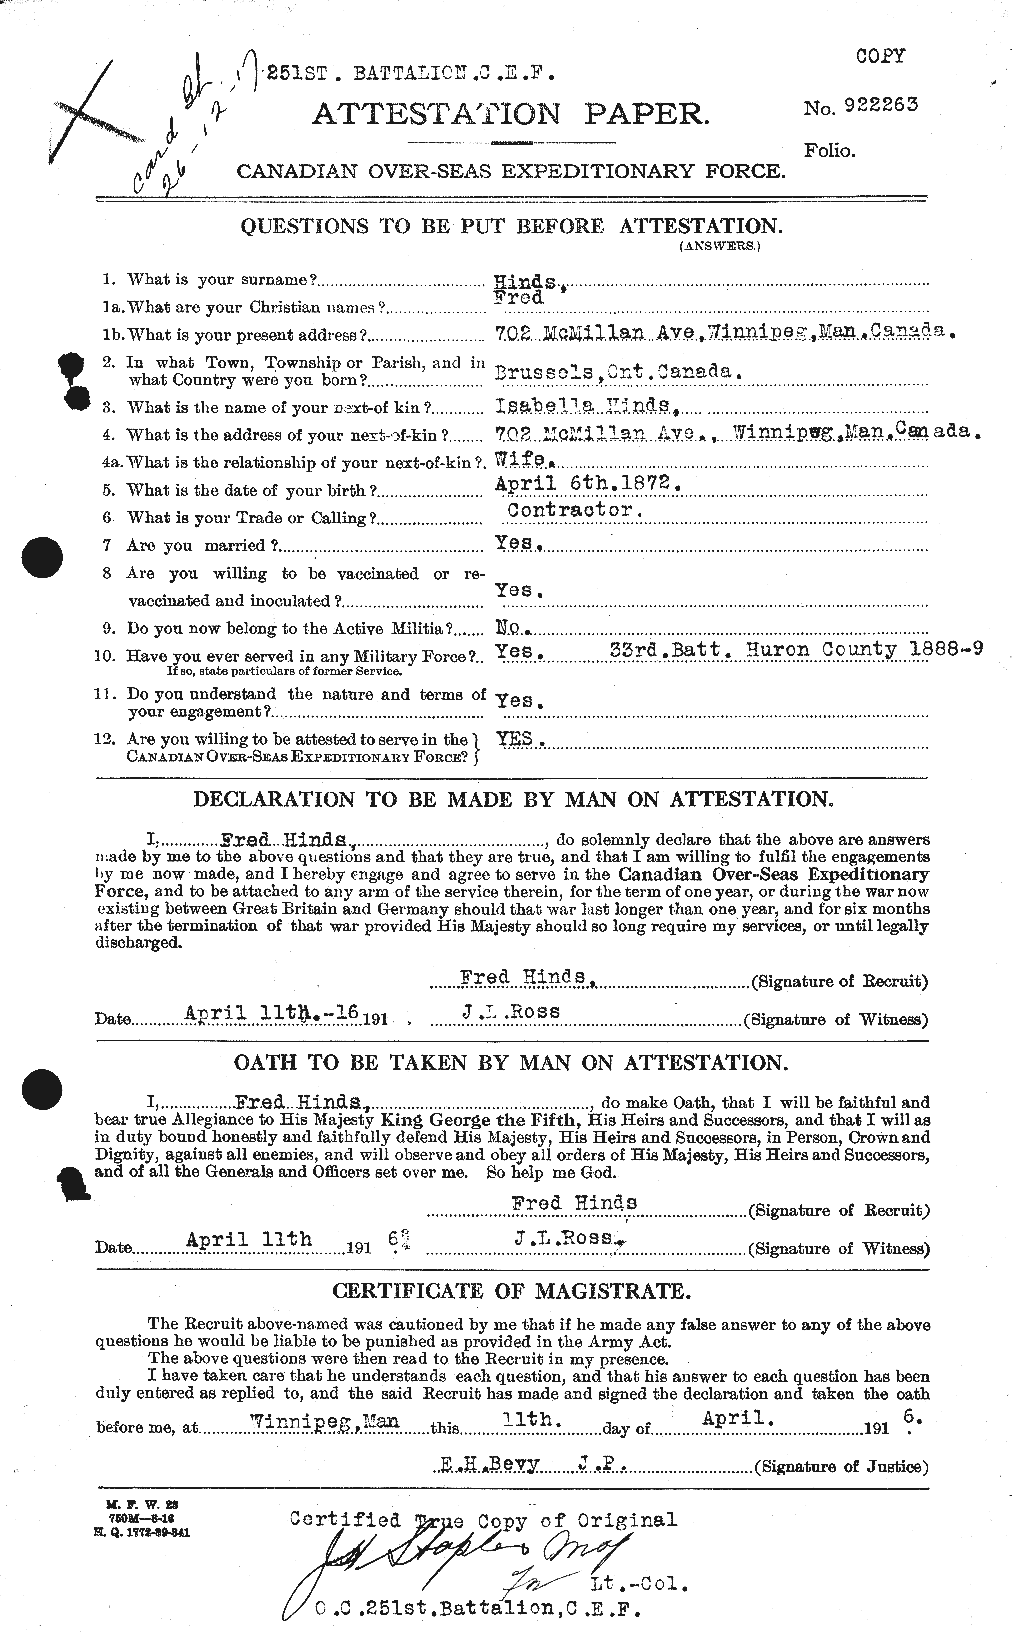 Personnel Records of the First World War - CEF 394387a